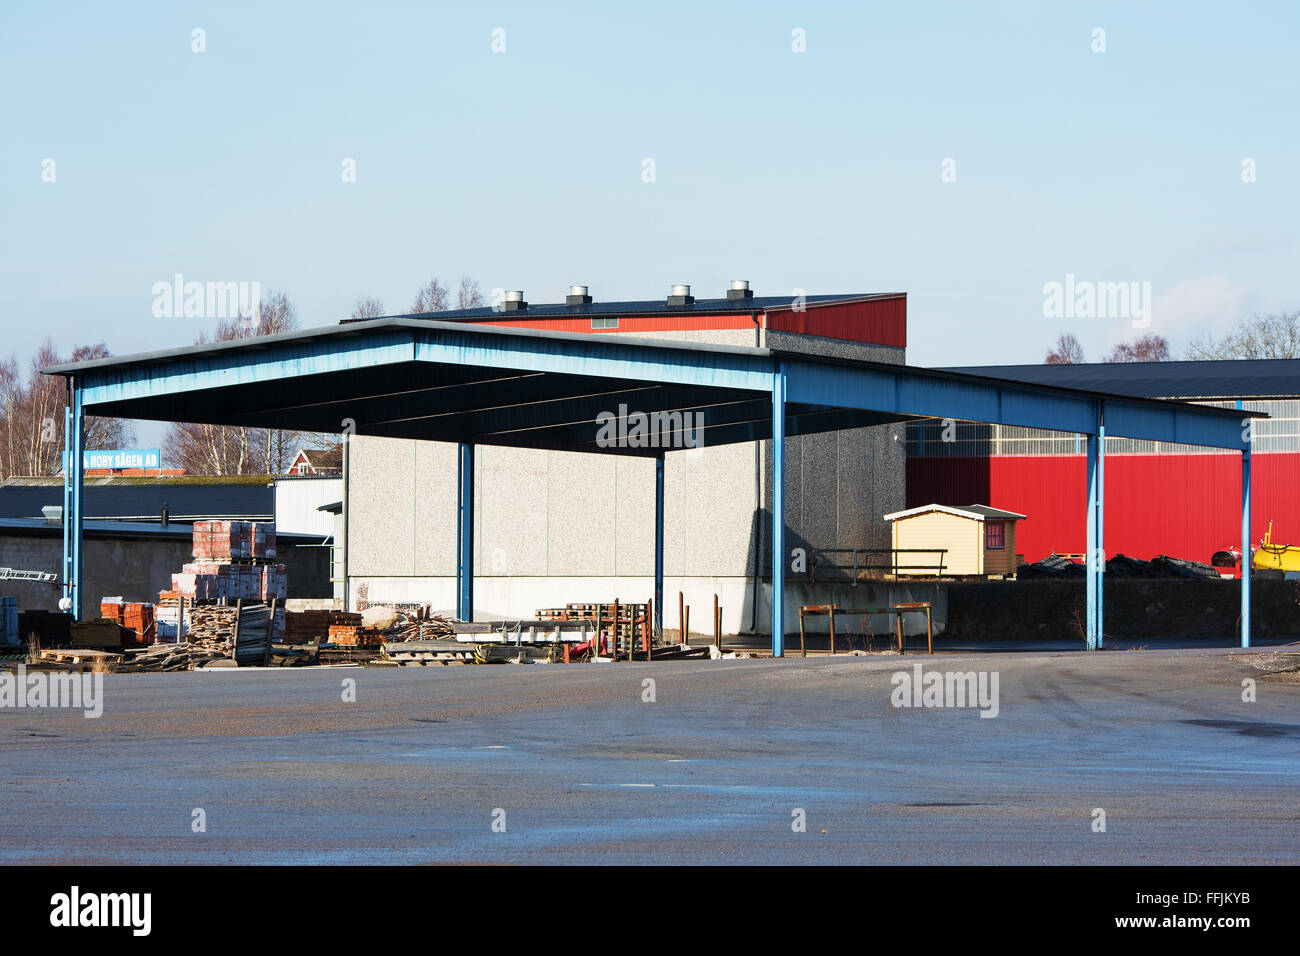 Brakne-Hoby, Sweden - February 07, 2016: An outdoor storage area under a steel roof in an industrial area. Industrial building i Stock Photo